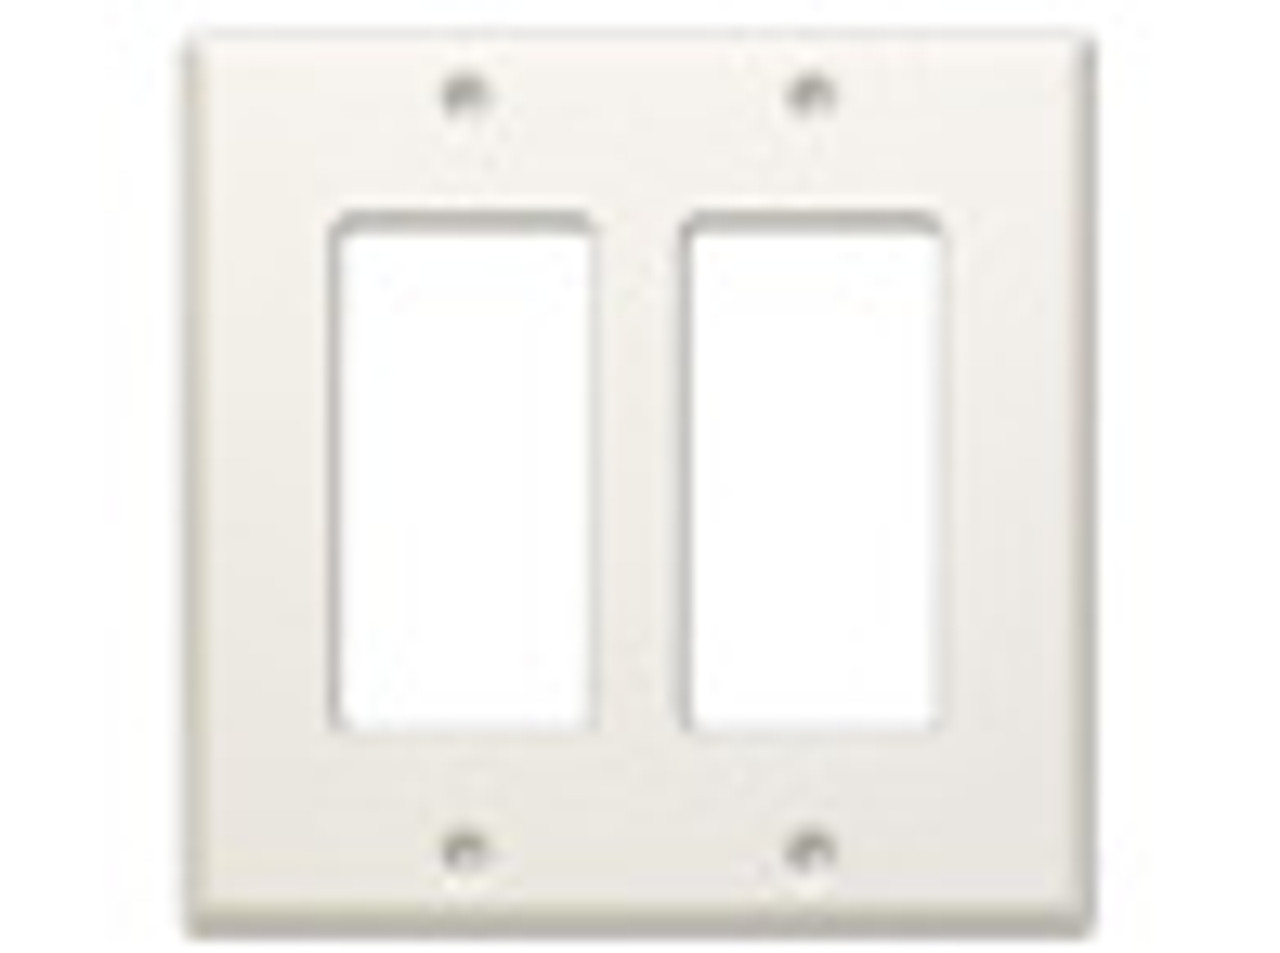 RDL CP-2 Double Cover Plate (CP2)